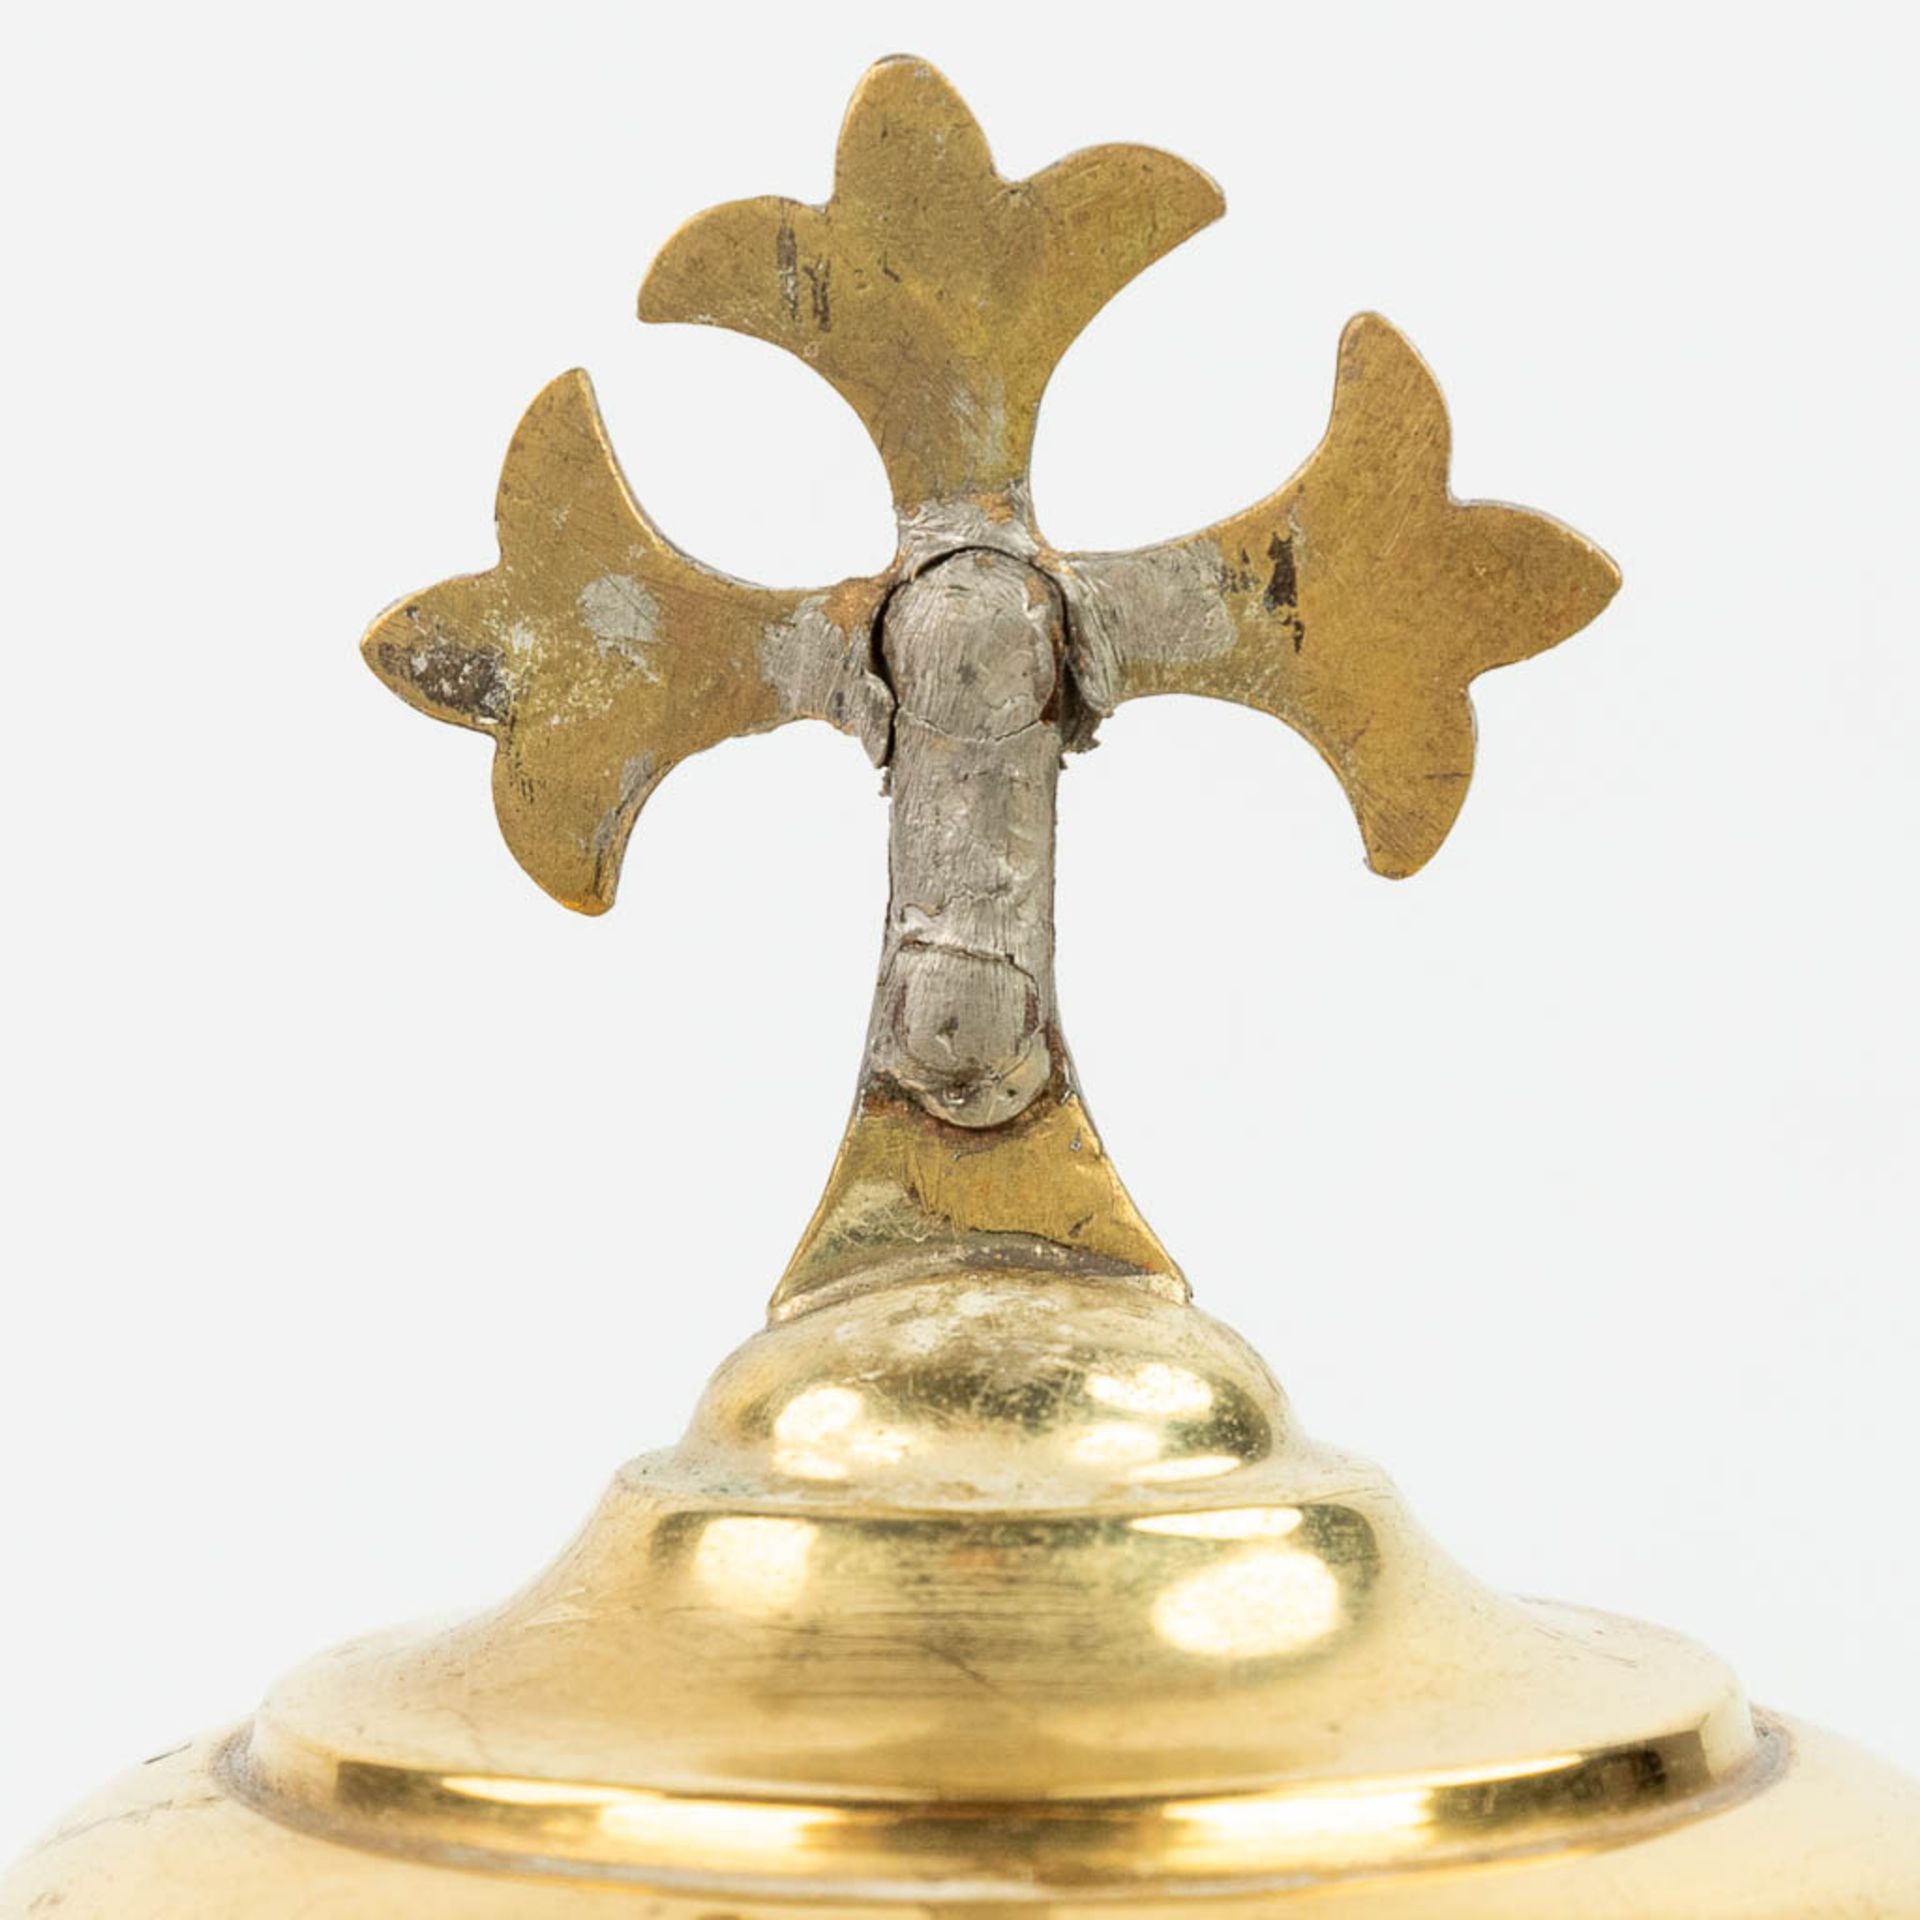 A collection of 4 large ciboria and a chalice made of silver and gold plated metal. - Image 23 of 24